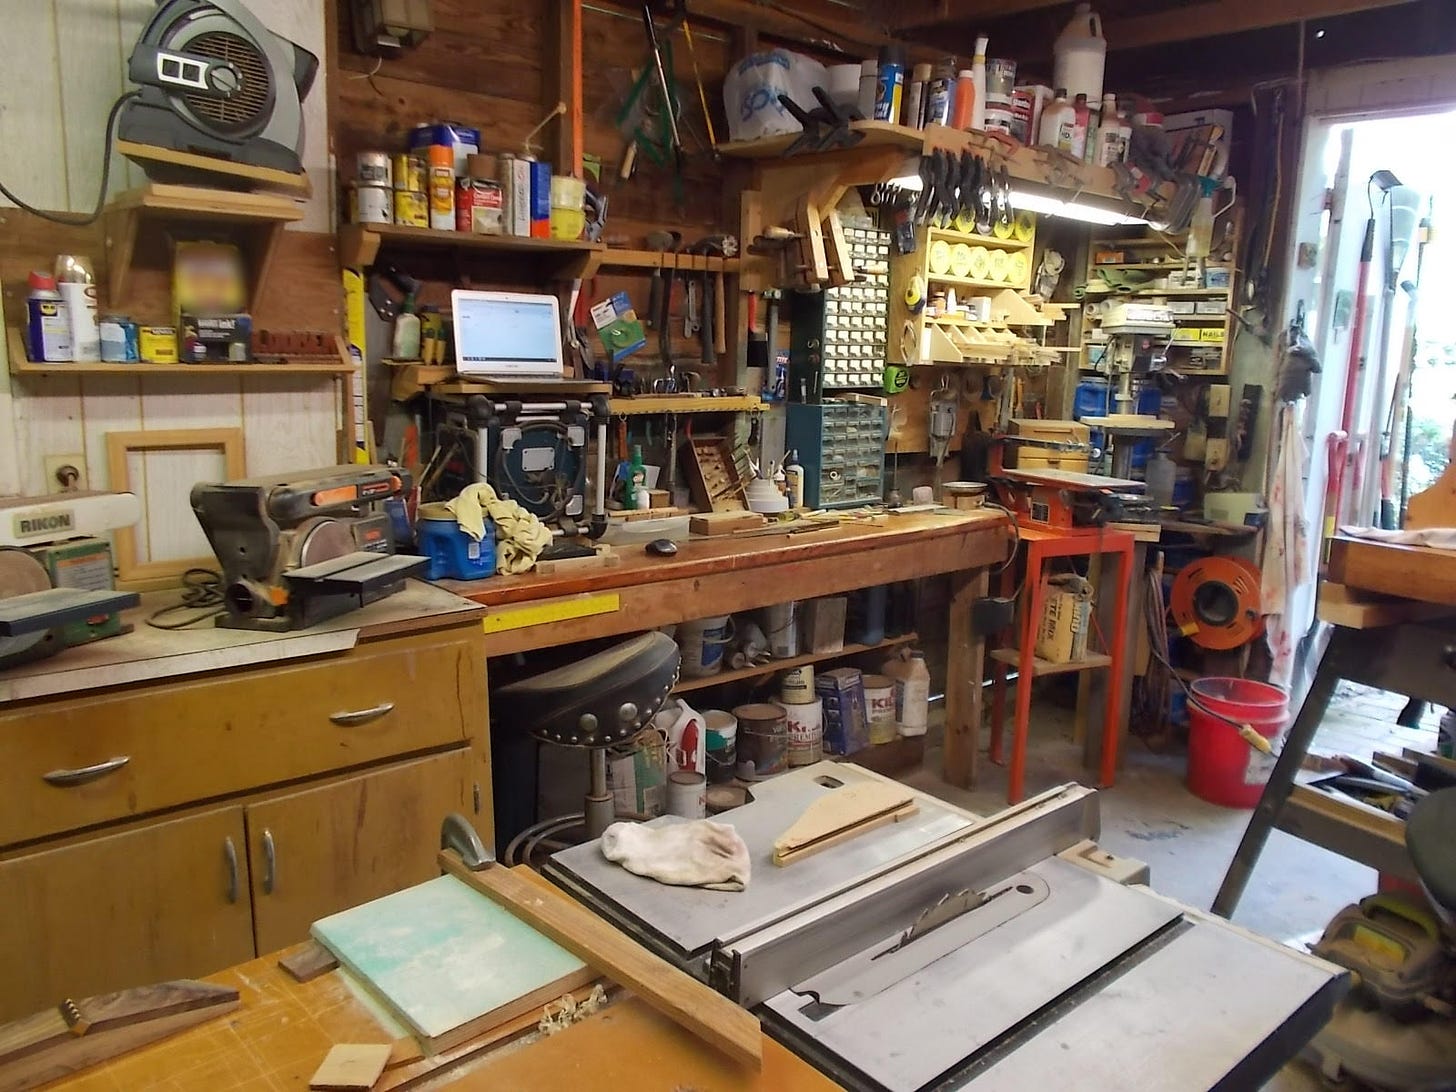 Inside my 100 year-old workshop, facing the main workbench. No newts in sight. They are camera shy.